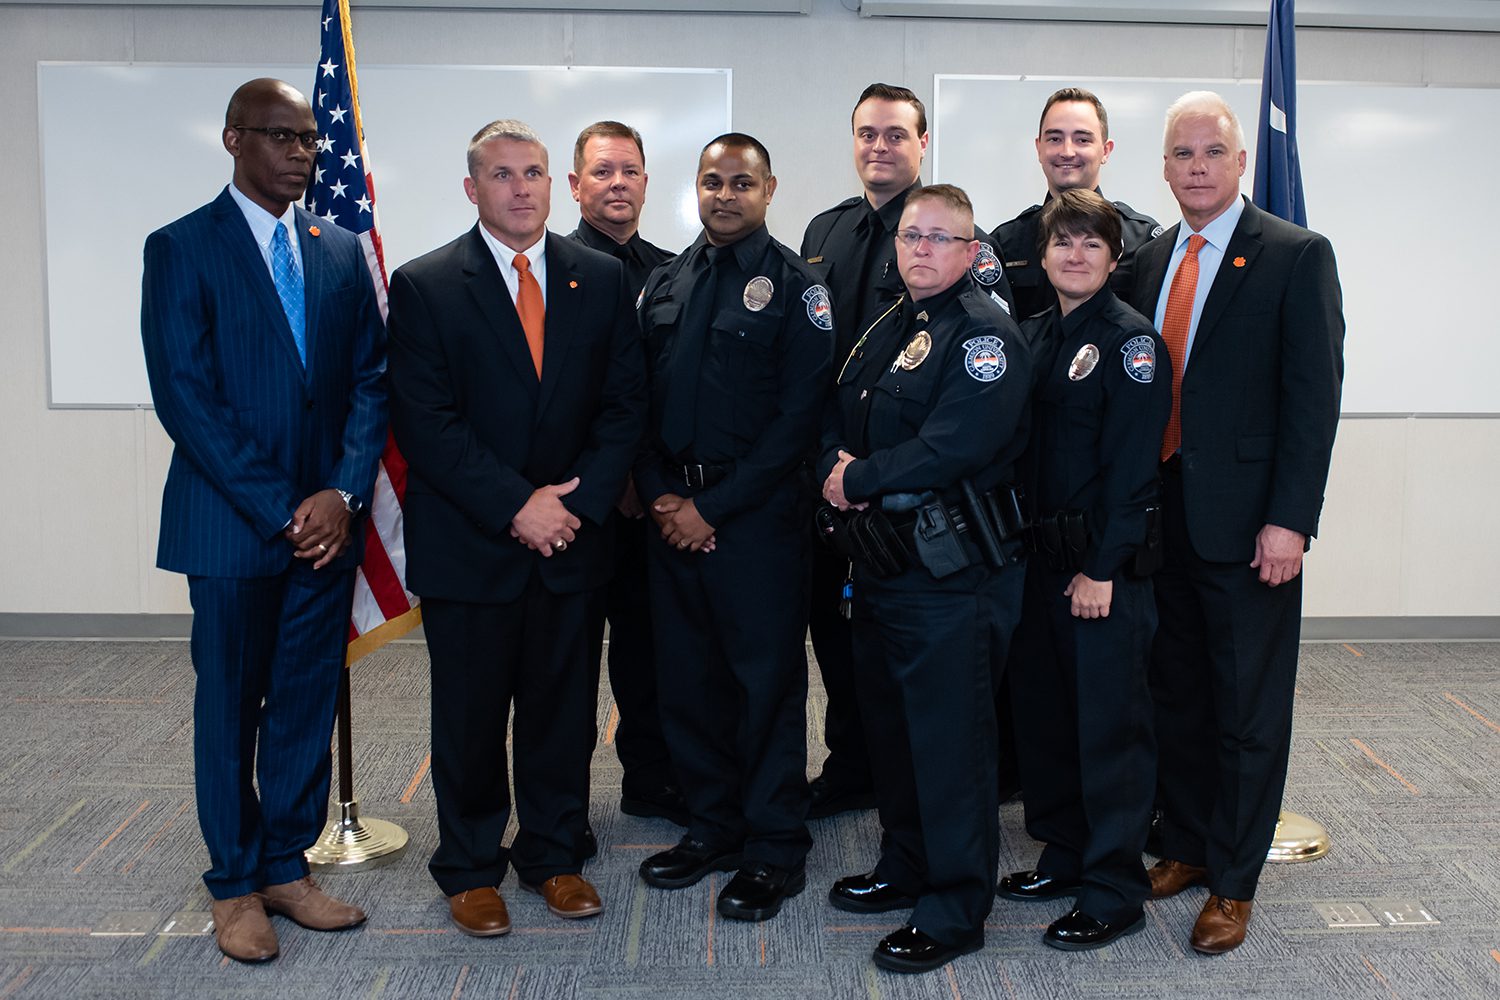 Associate Vice President for Public Safety and Chief of Police Greg Mullen (right) joins the newest group of officers announced among his department in July 2019.